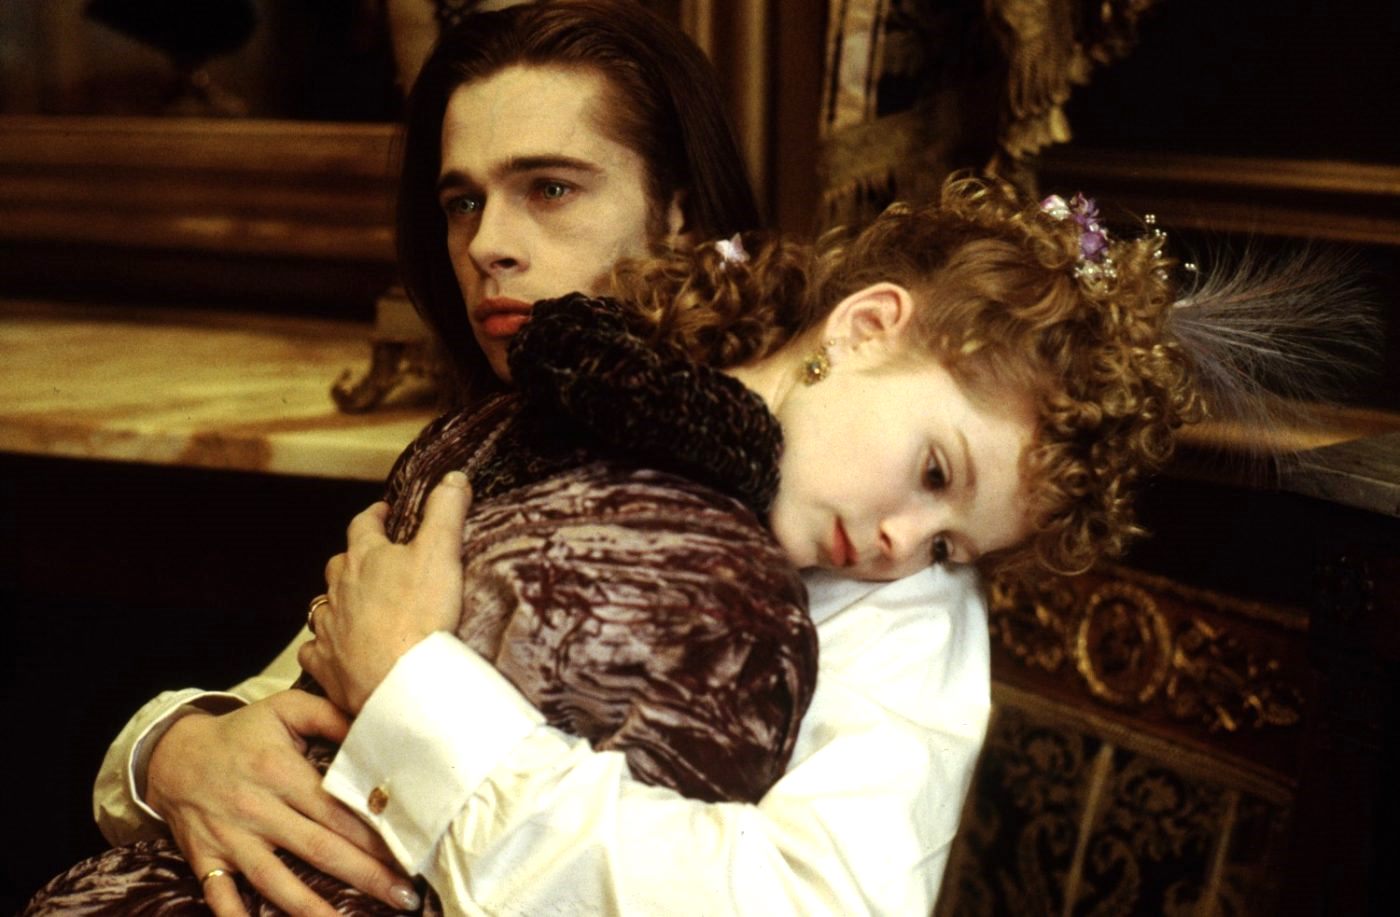 Louis (Brad Pitt) and Claudia (Kirsten Dunst) in Interview with the Vampire: The Vampire Chronicles (1994)